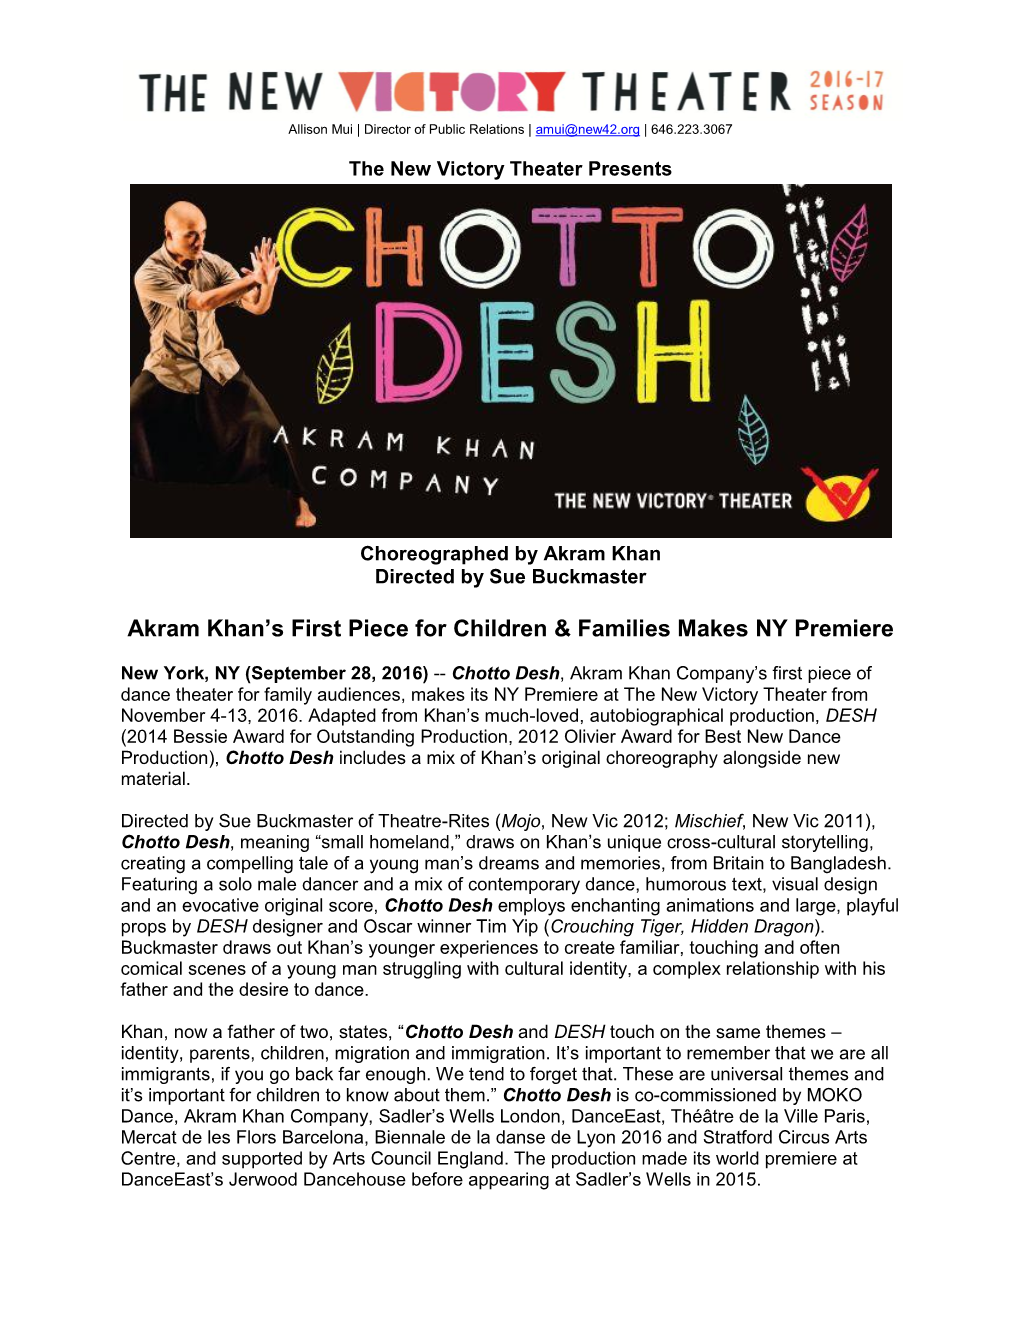 Akram Khan's First Piece for Children & Families Makes NY Premiere